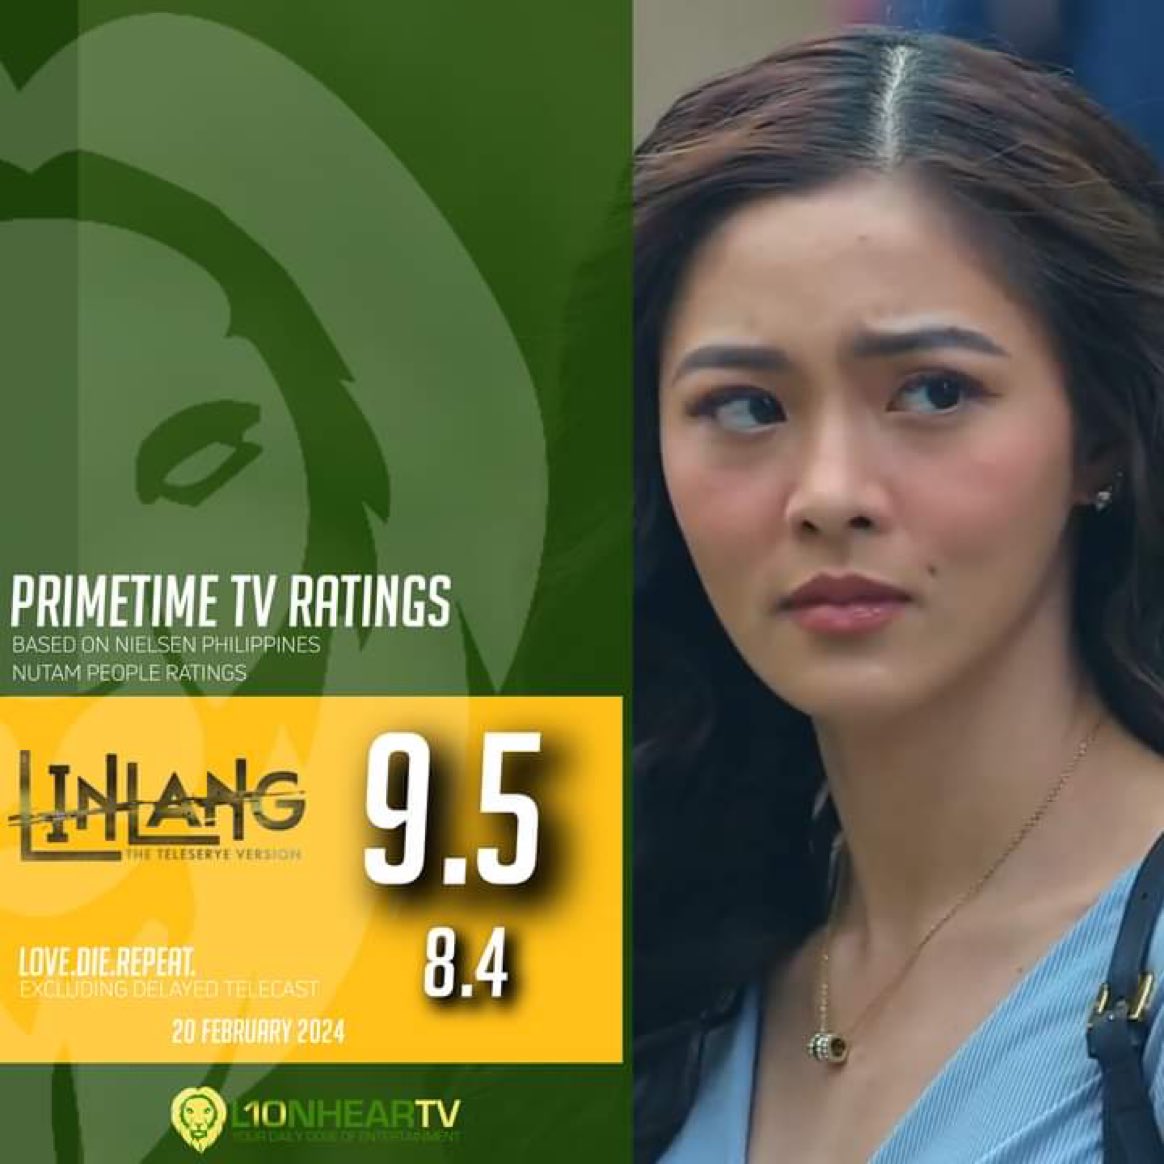 LOOK: #LinlangTheTeleseryeVersion is the undisputed leader of its timeslot, as it logged another major win in the ratings game, versus LoveDieRepeat, on Tuesday, February 20, Nielsen Phiippines data reveal.

Congrats ulit Team Linlang 🙌👏💪

#KimPau
#LinlangKaso…